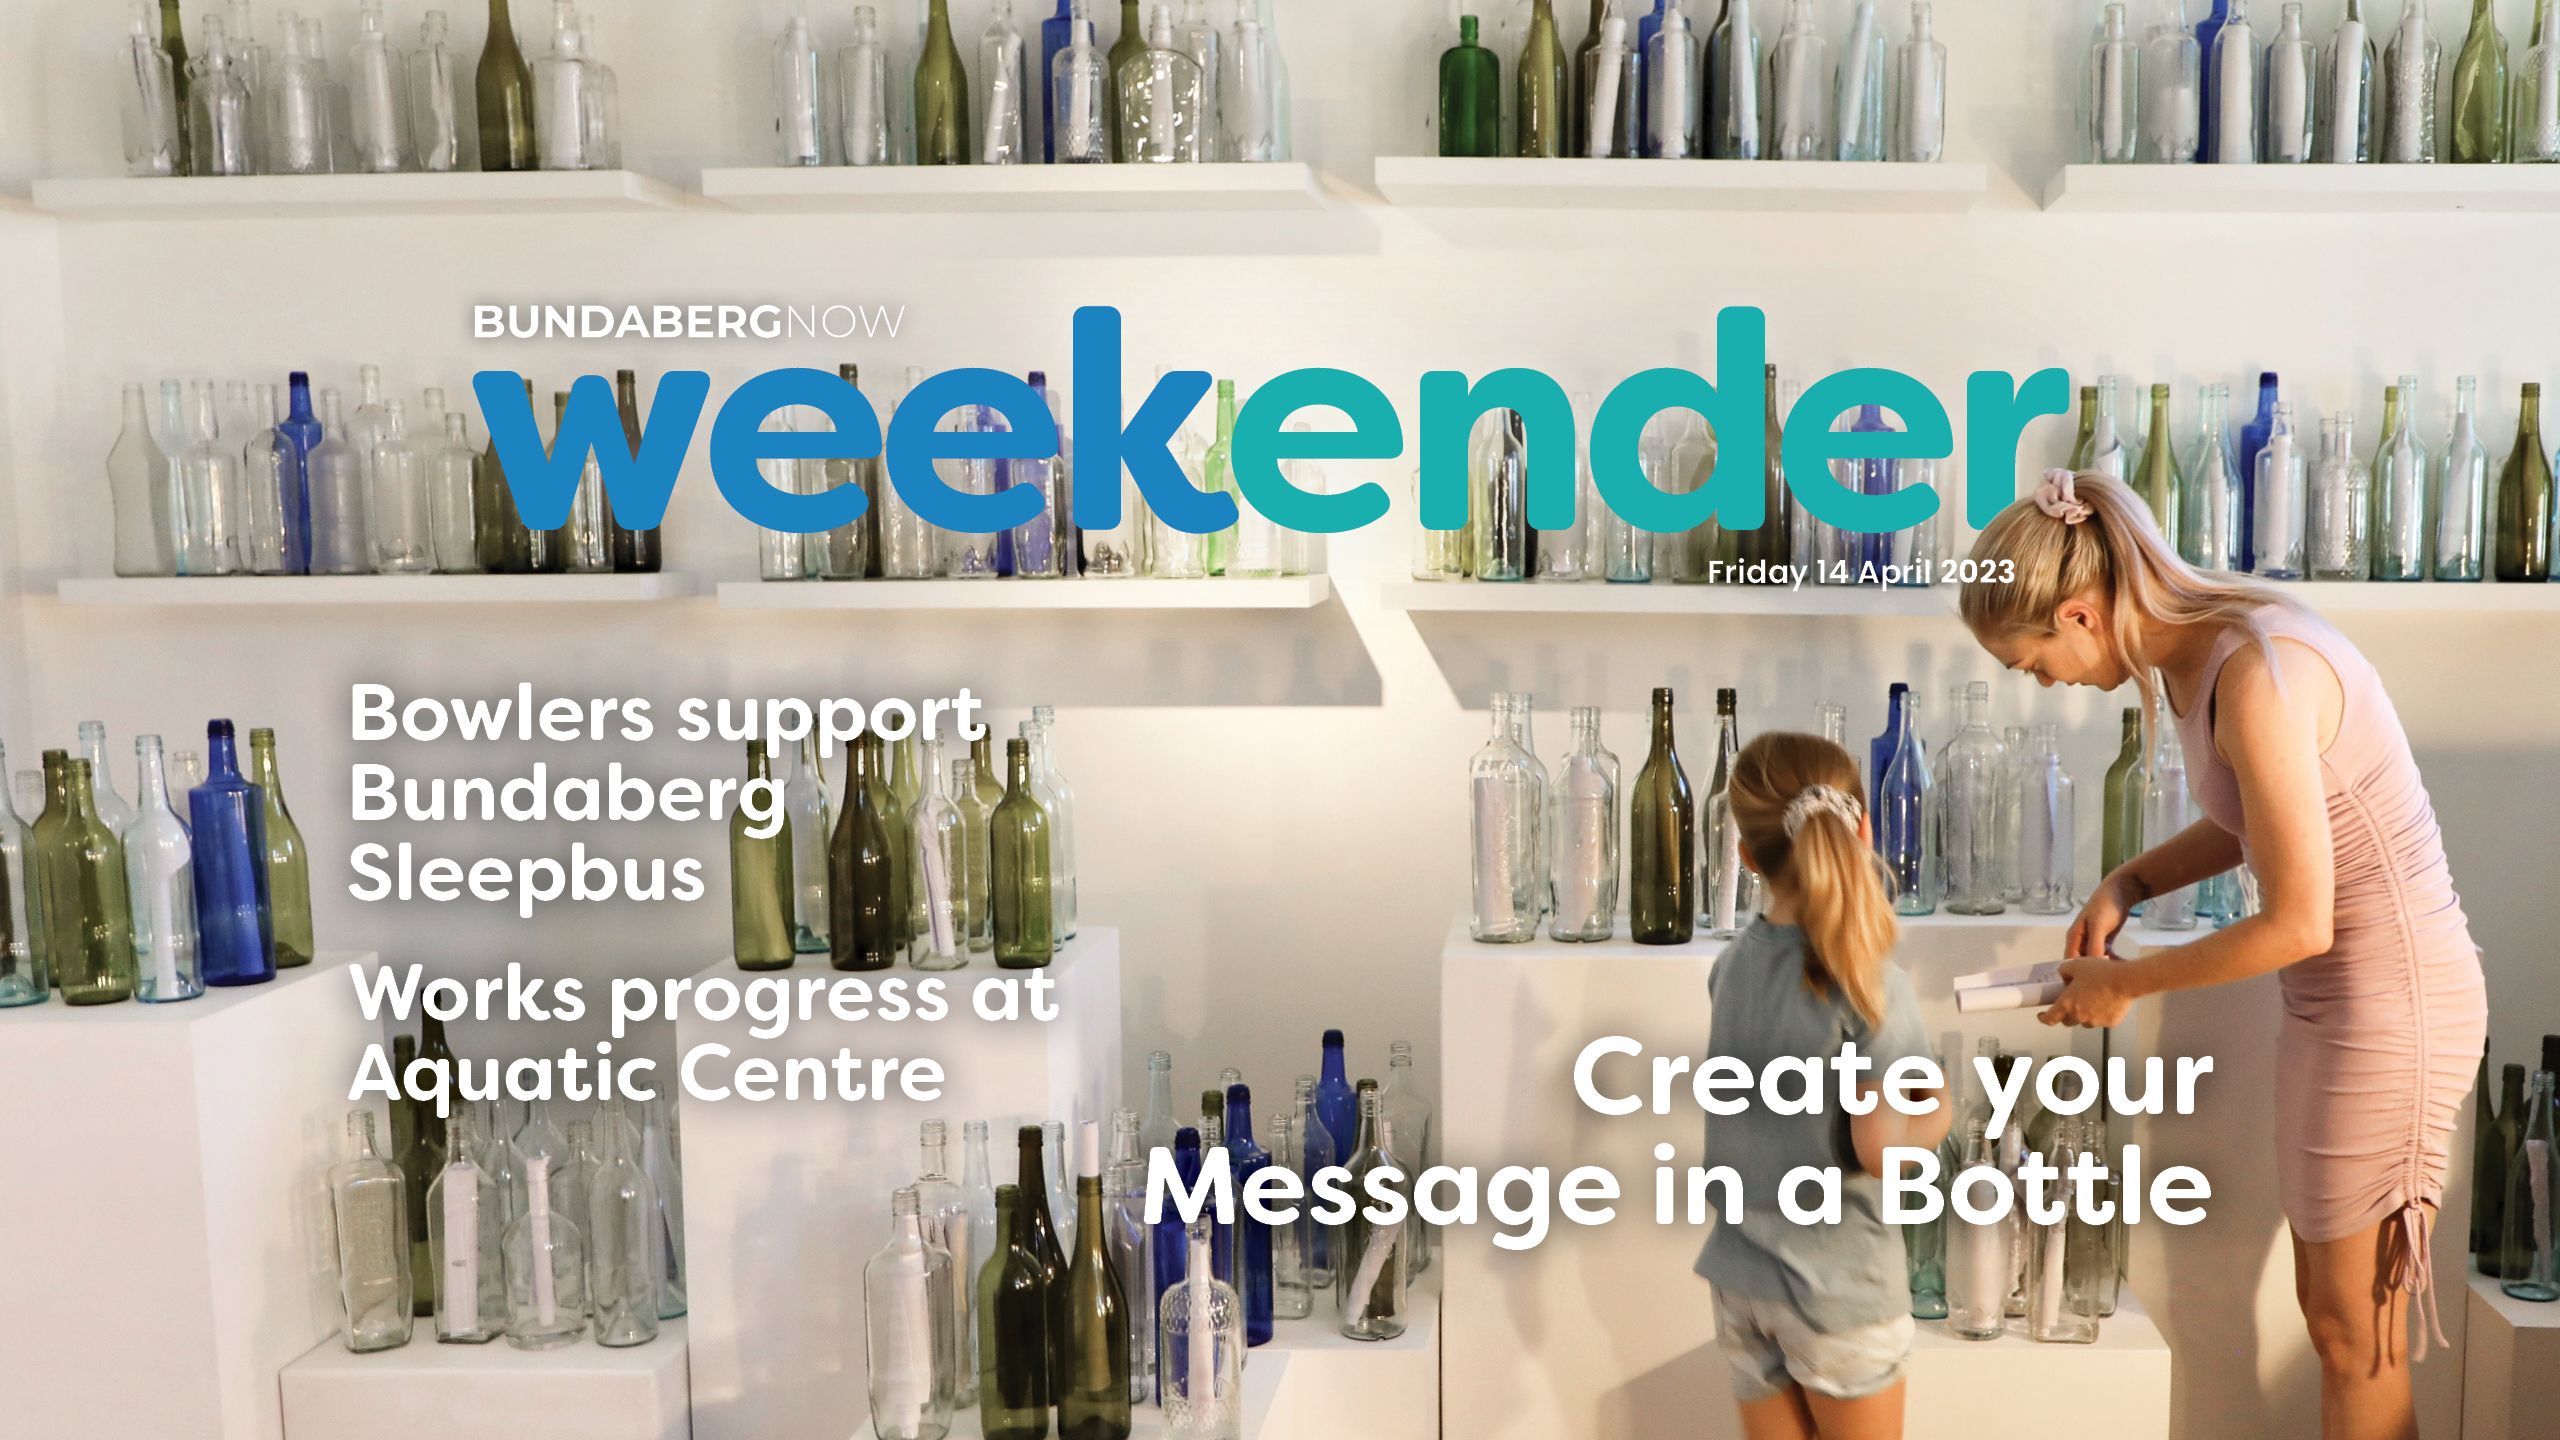 Weekender: create your Message in a Bottle